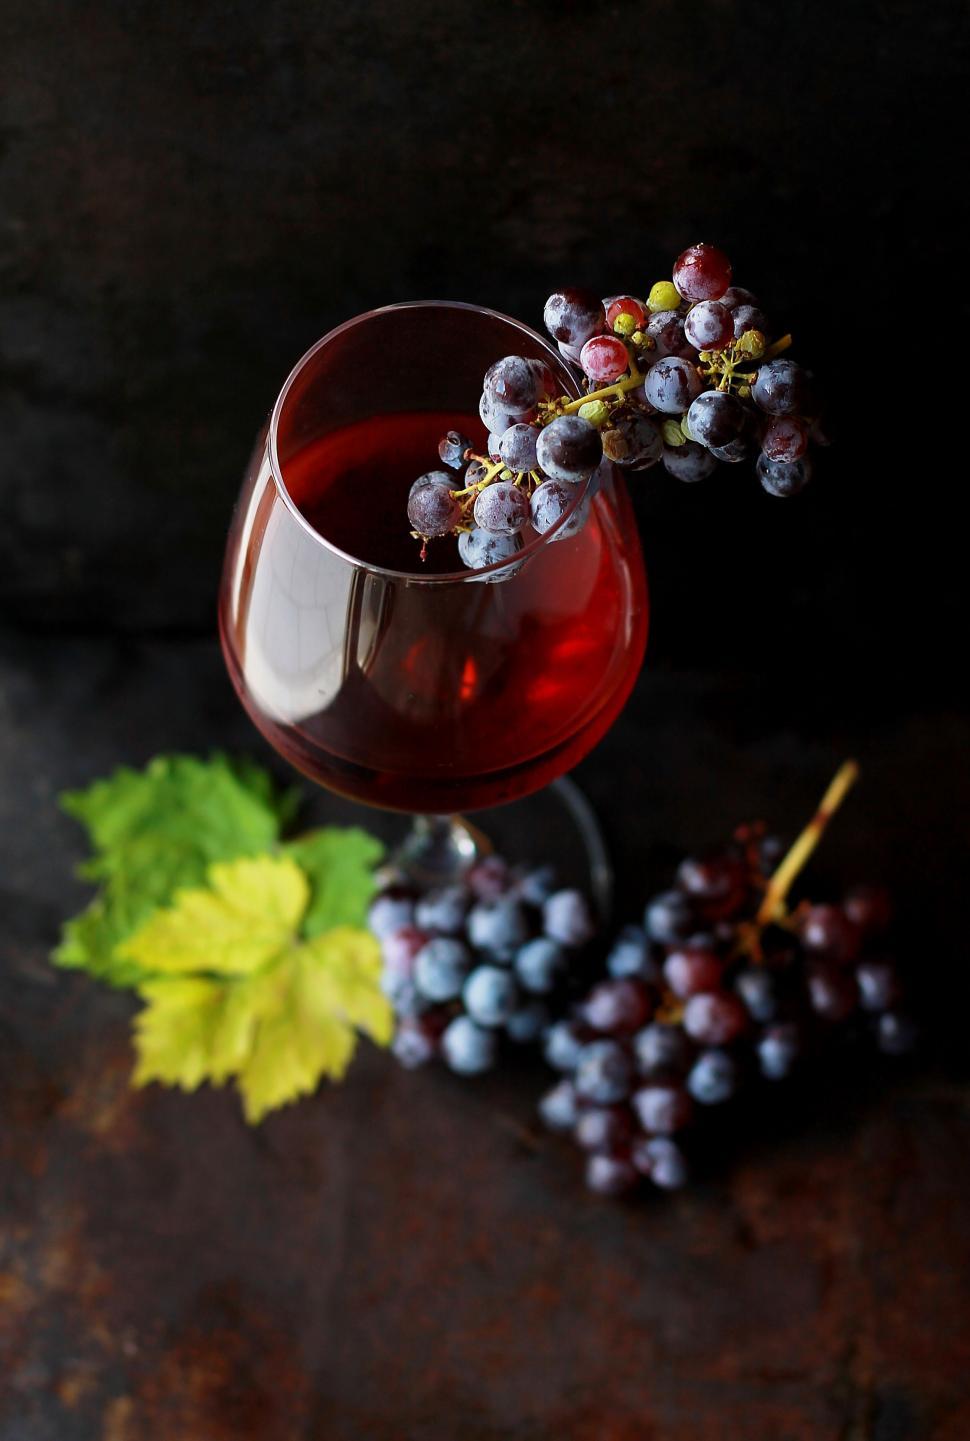 Free Image of Glass of Red Wine and Bunch of Grapes 